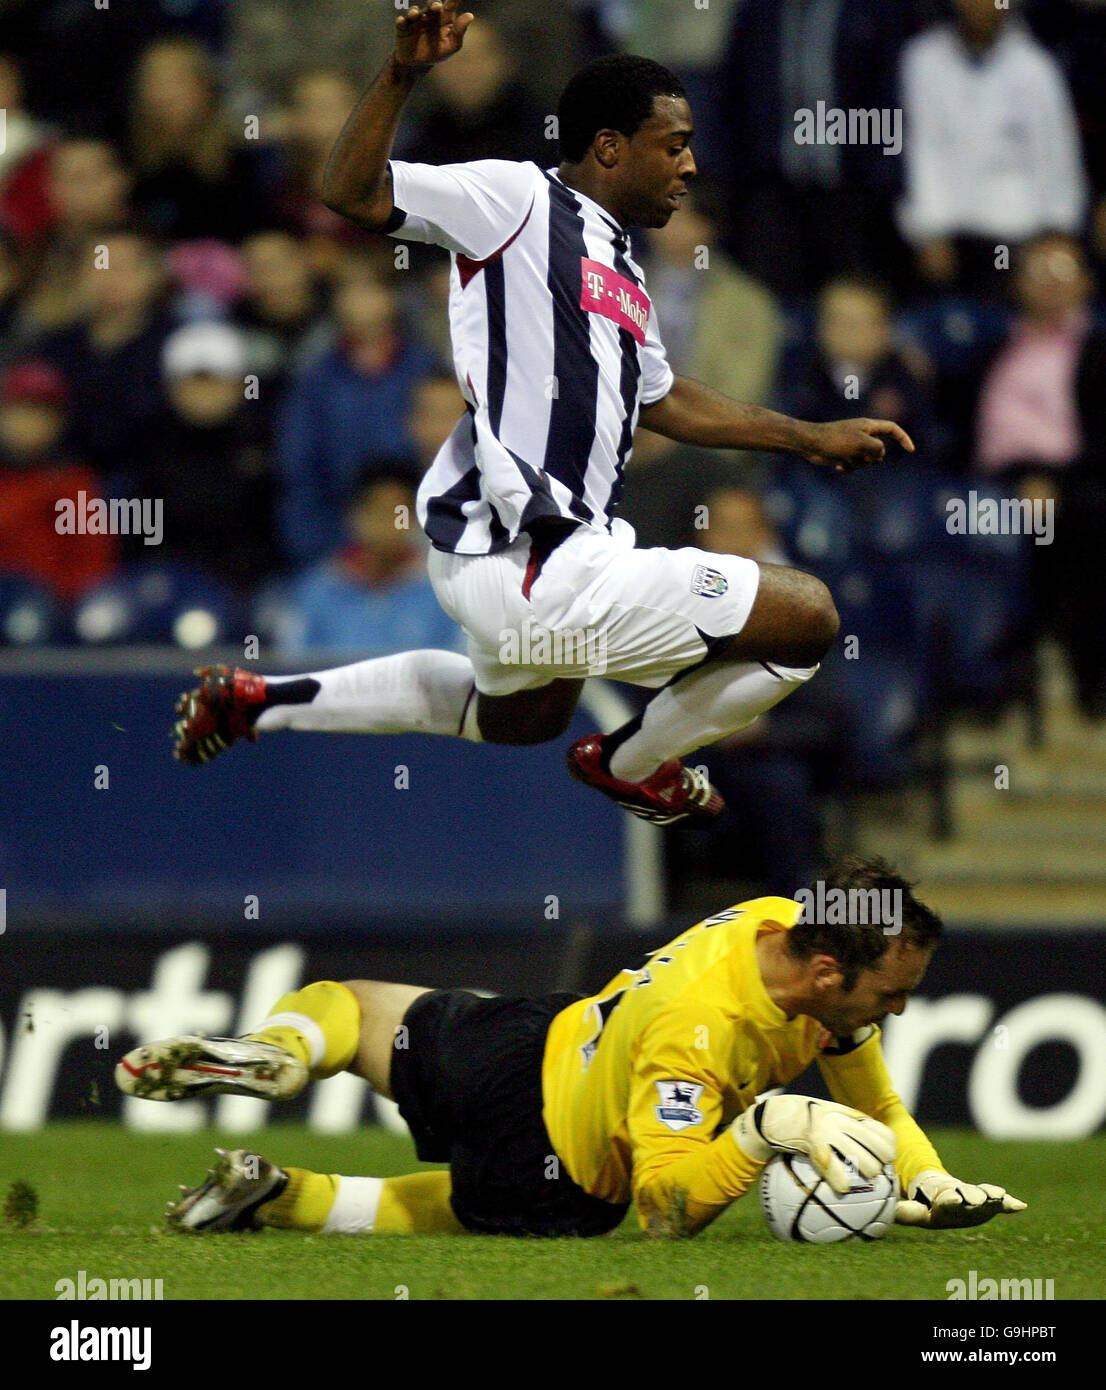 Arsenal goalkeeper Manuel Almunia saves at the feet of West Bromwich Albion's Nathan Ellington during the Carling Cup third round at The Hawthorns, West Bromwich. Stock Photo